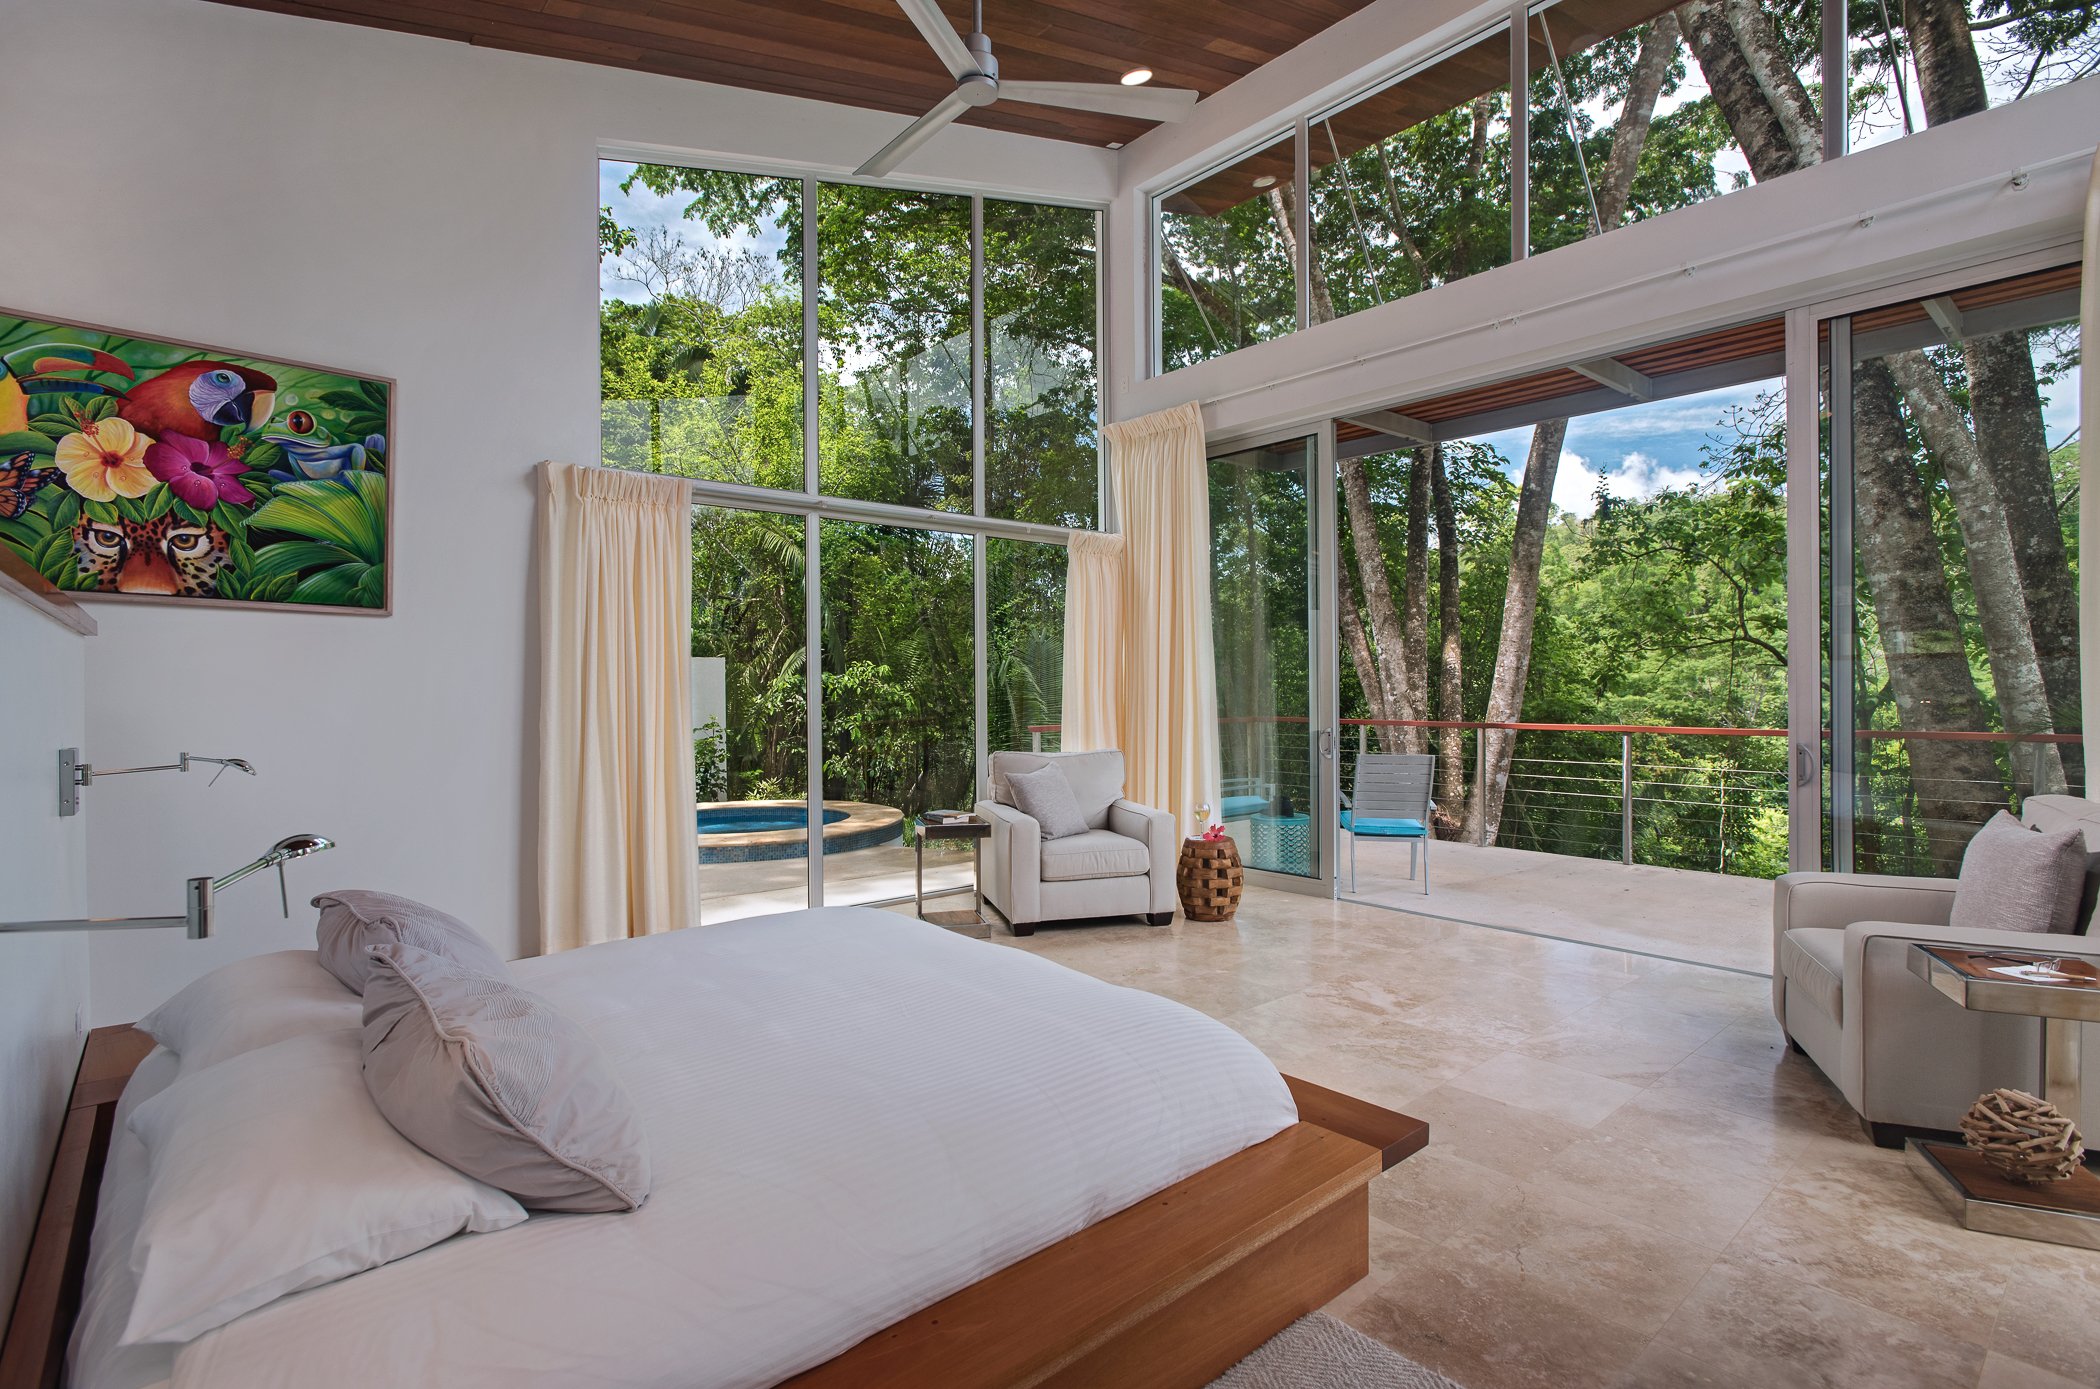 Belize Hotels | The Lodge at Chaa Creek